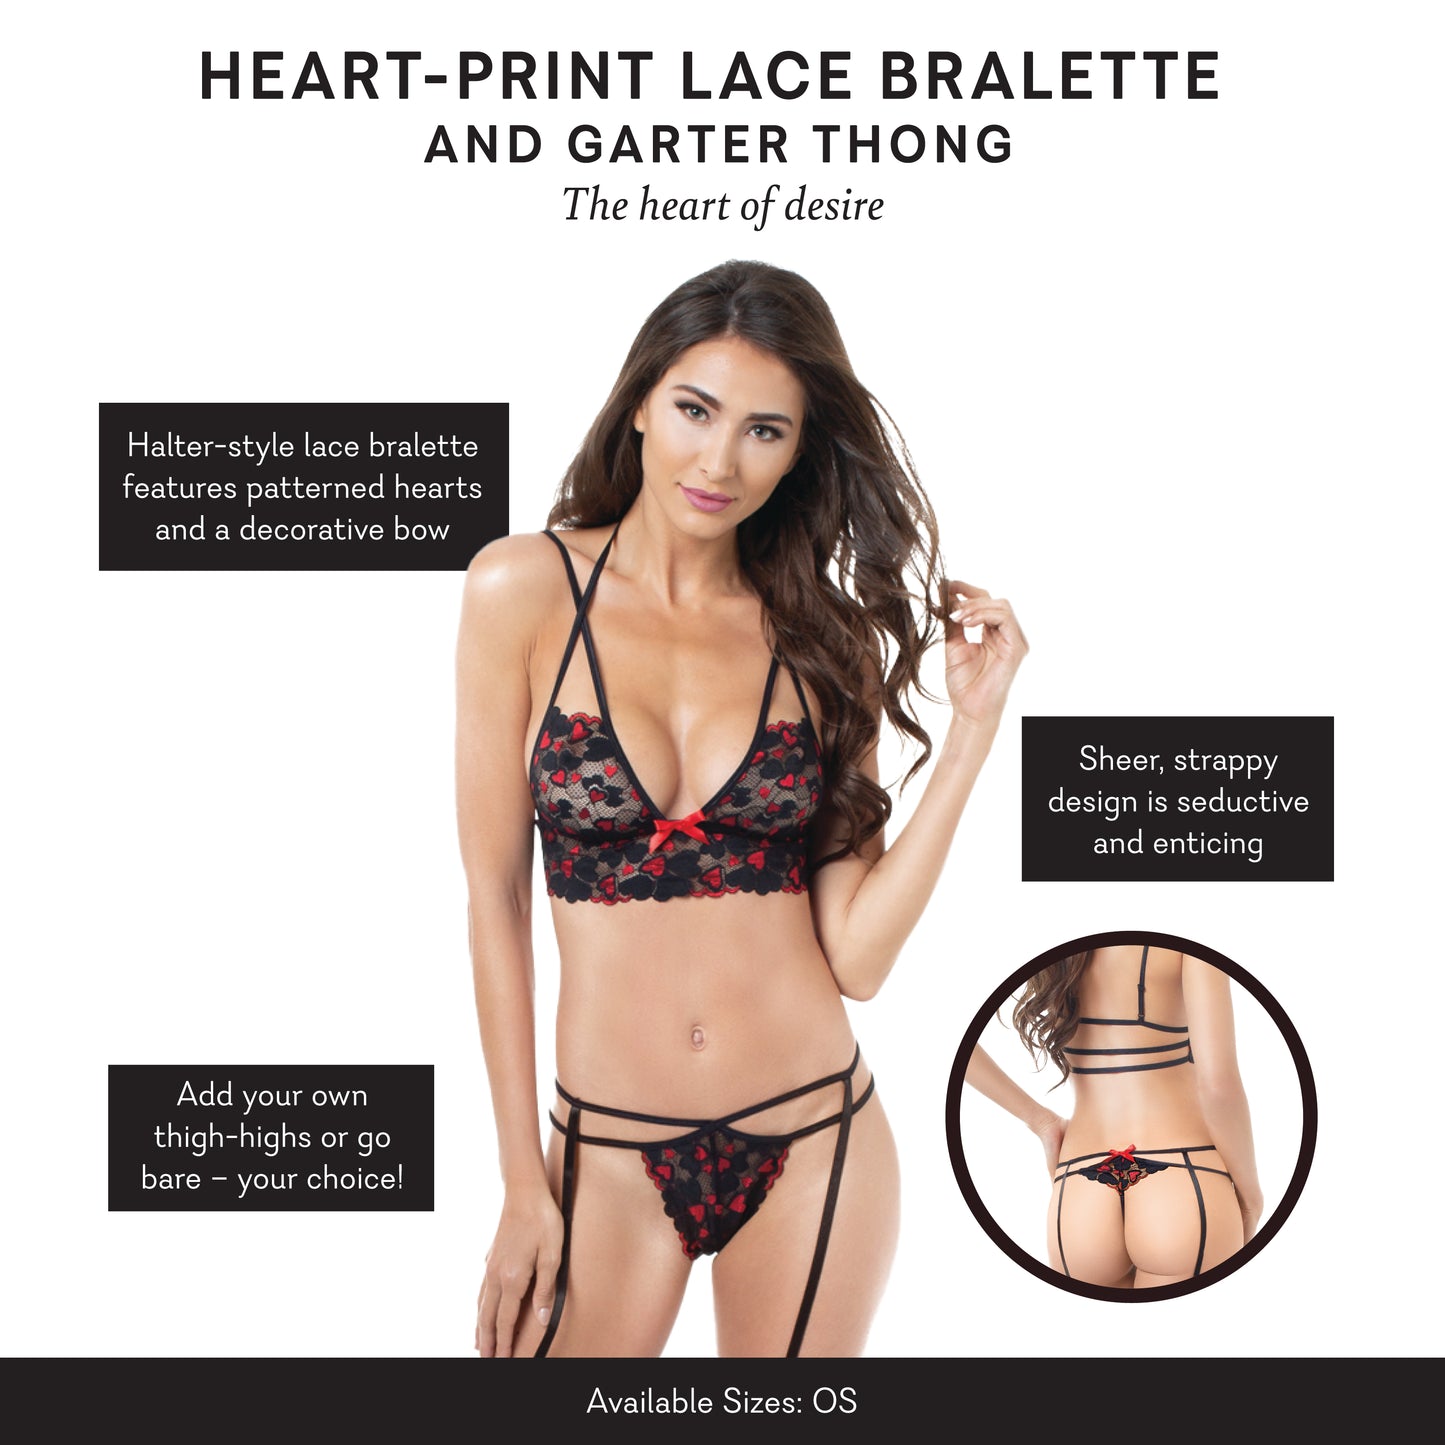 Heart-Print Lace Bralette & Garter Thong - One Size